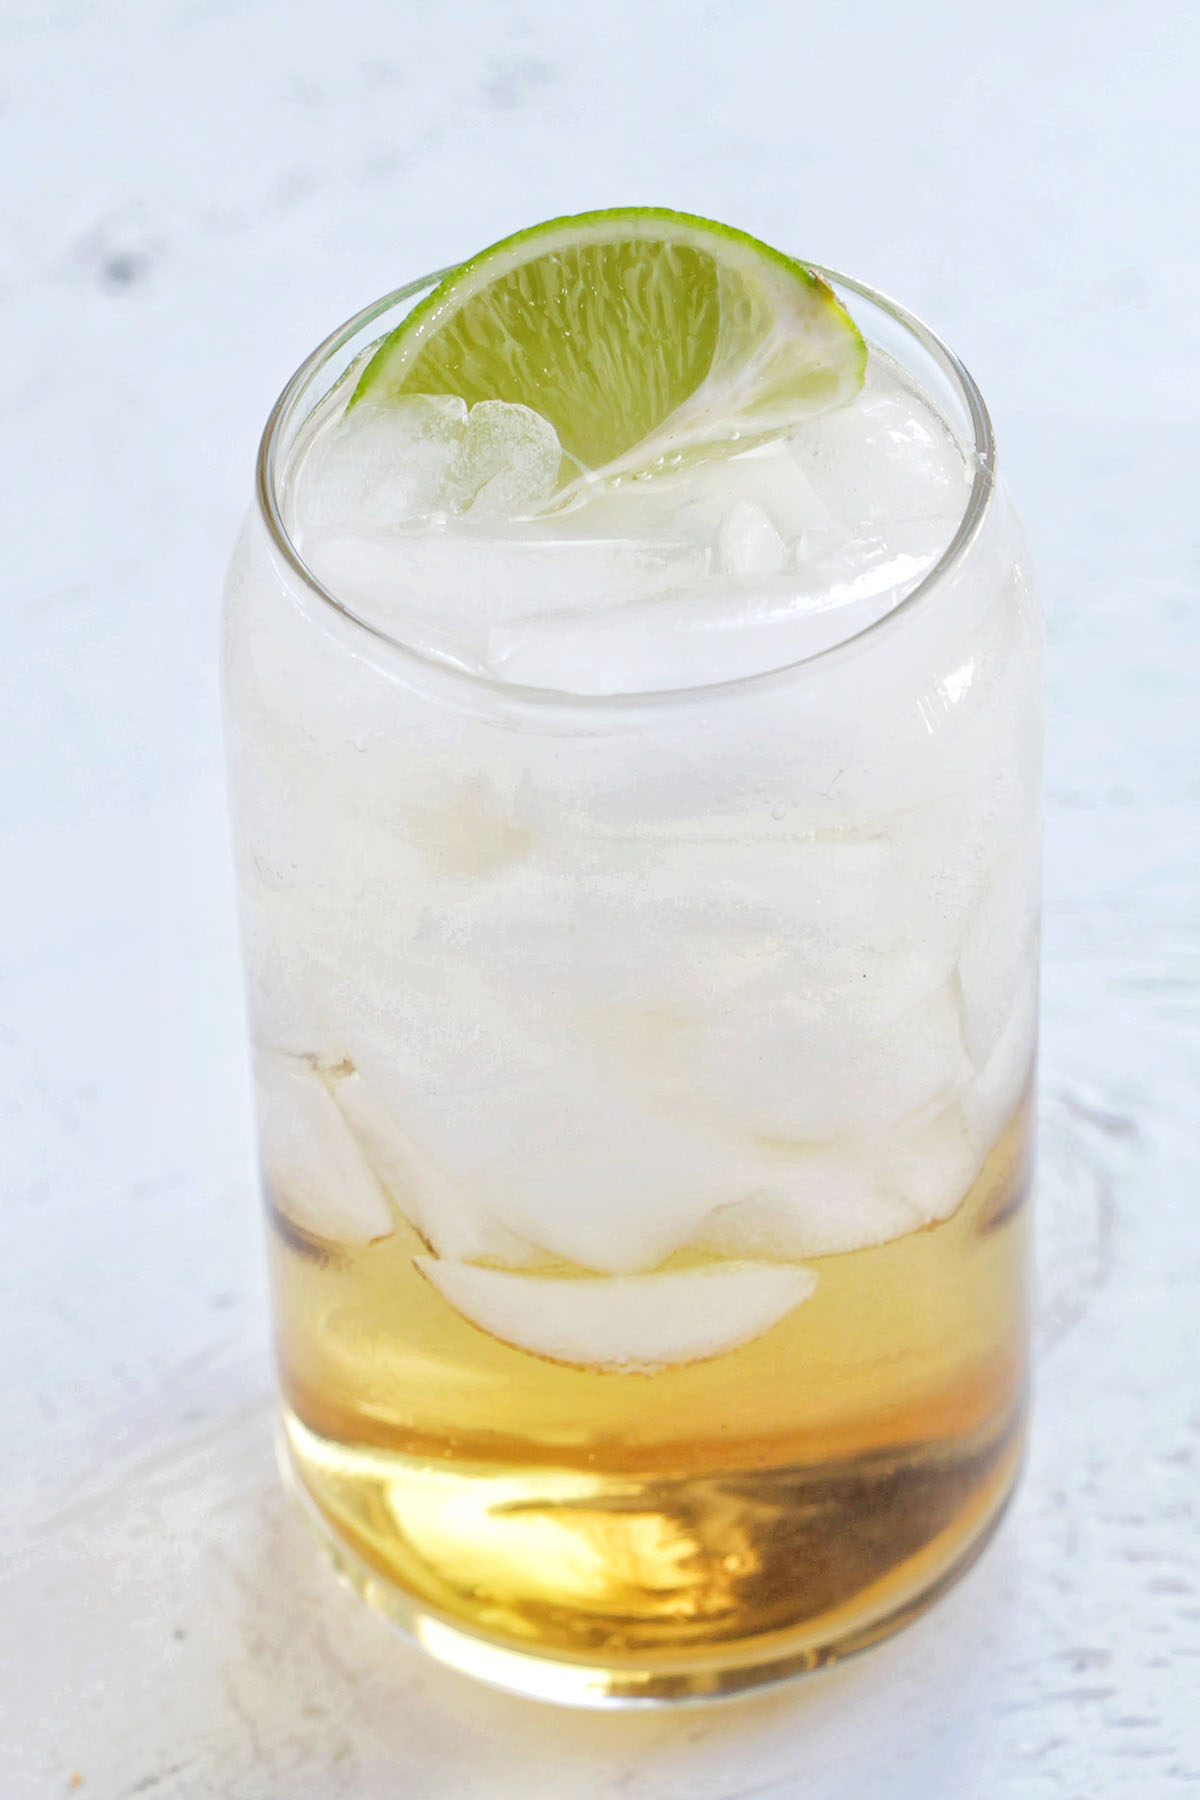 whiskey ginger beer with lime garnish.